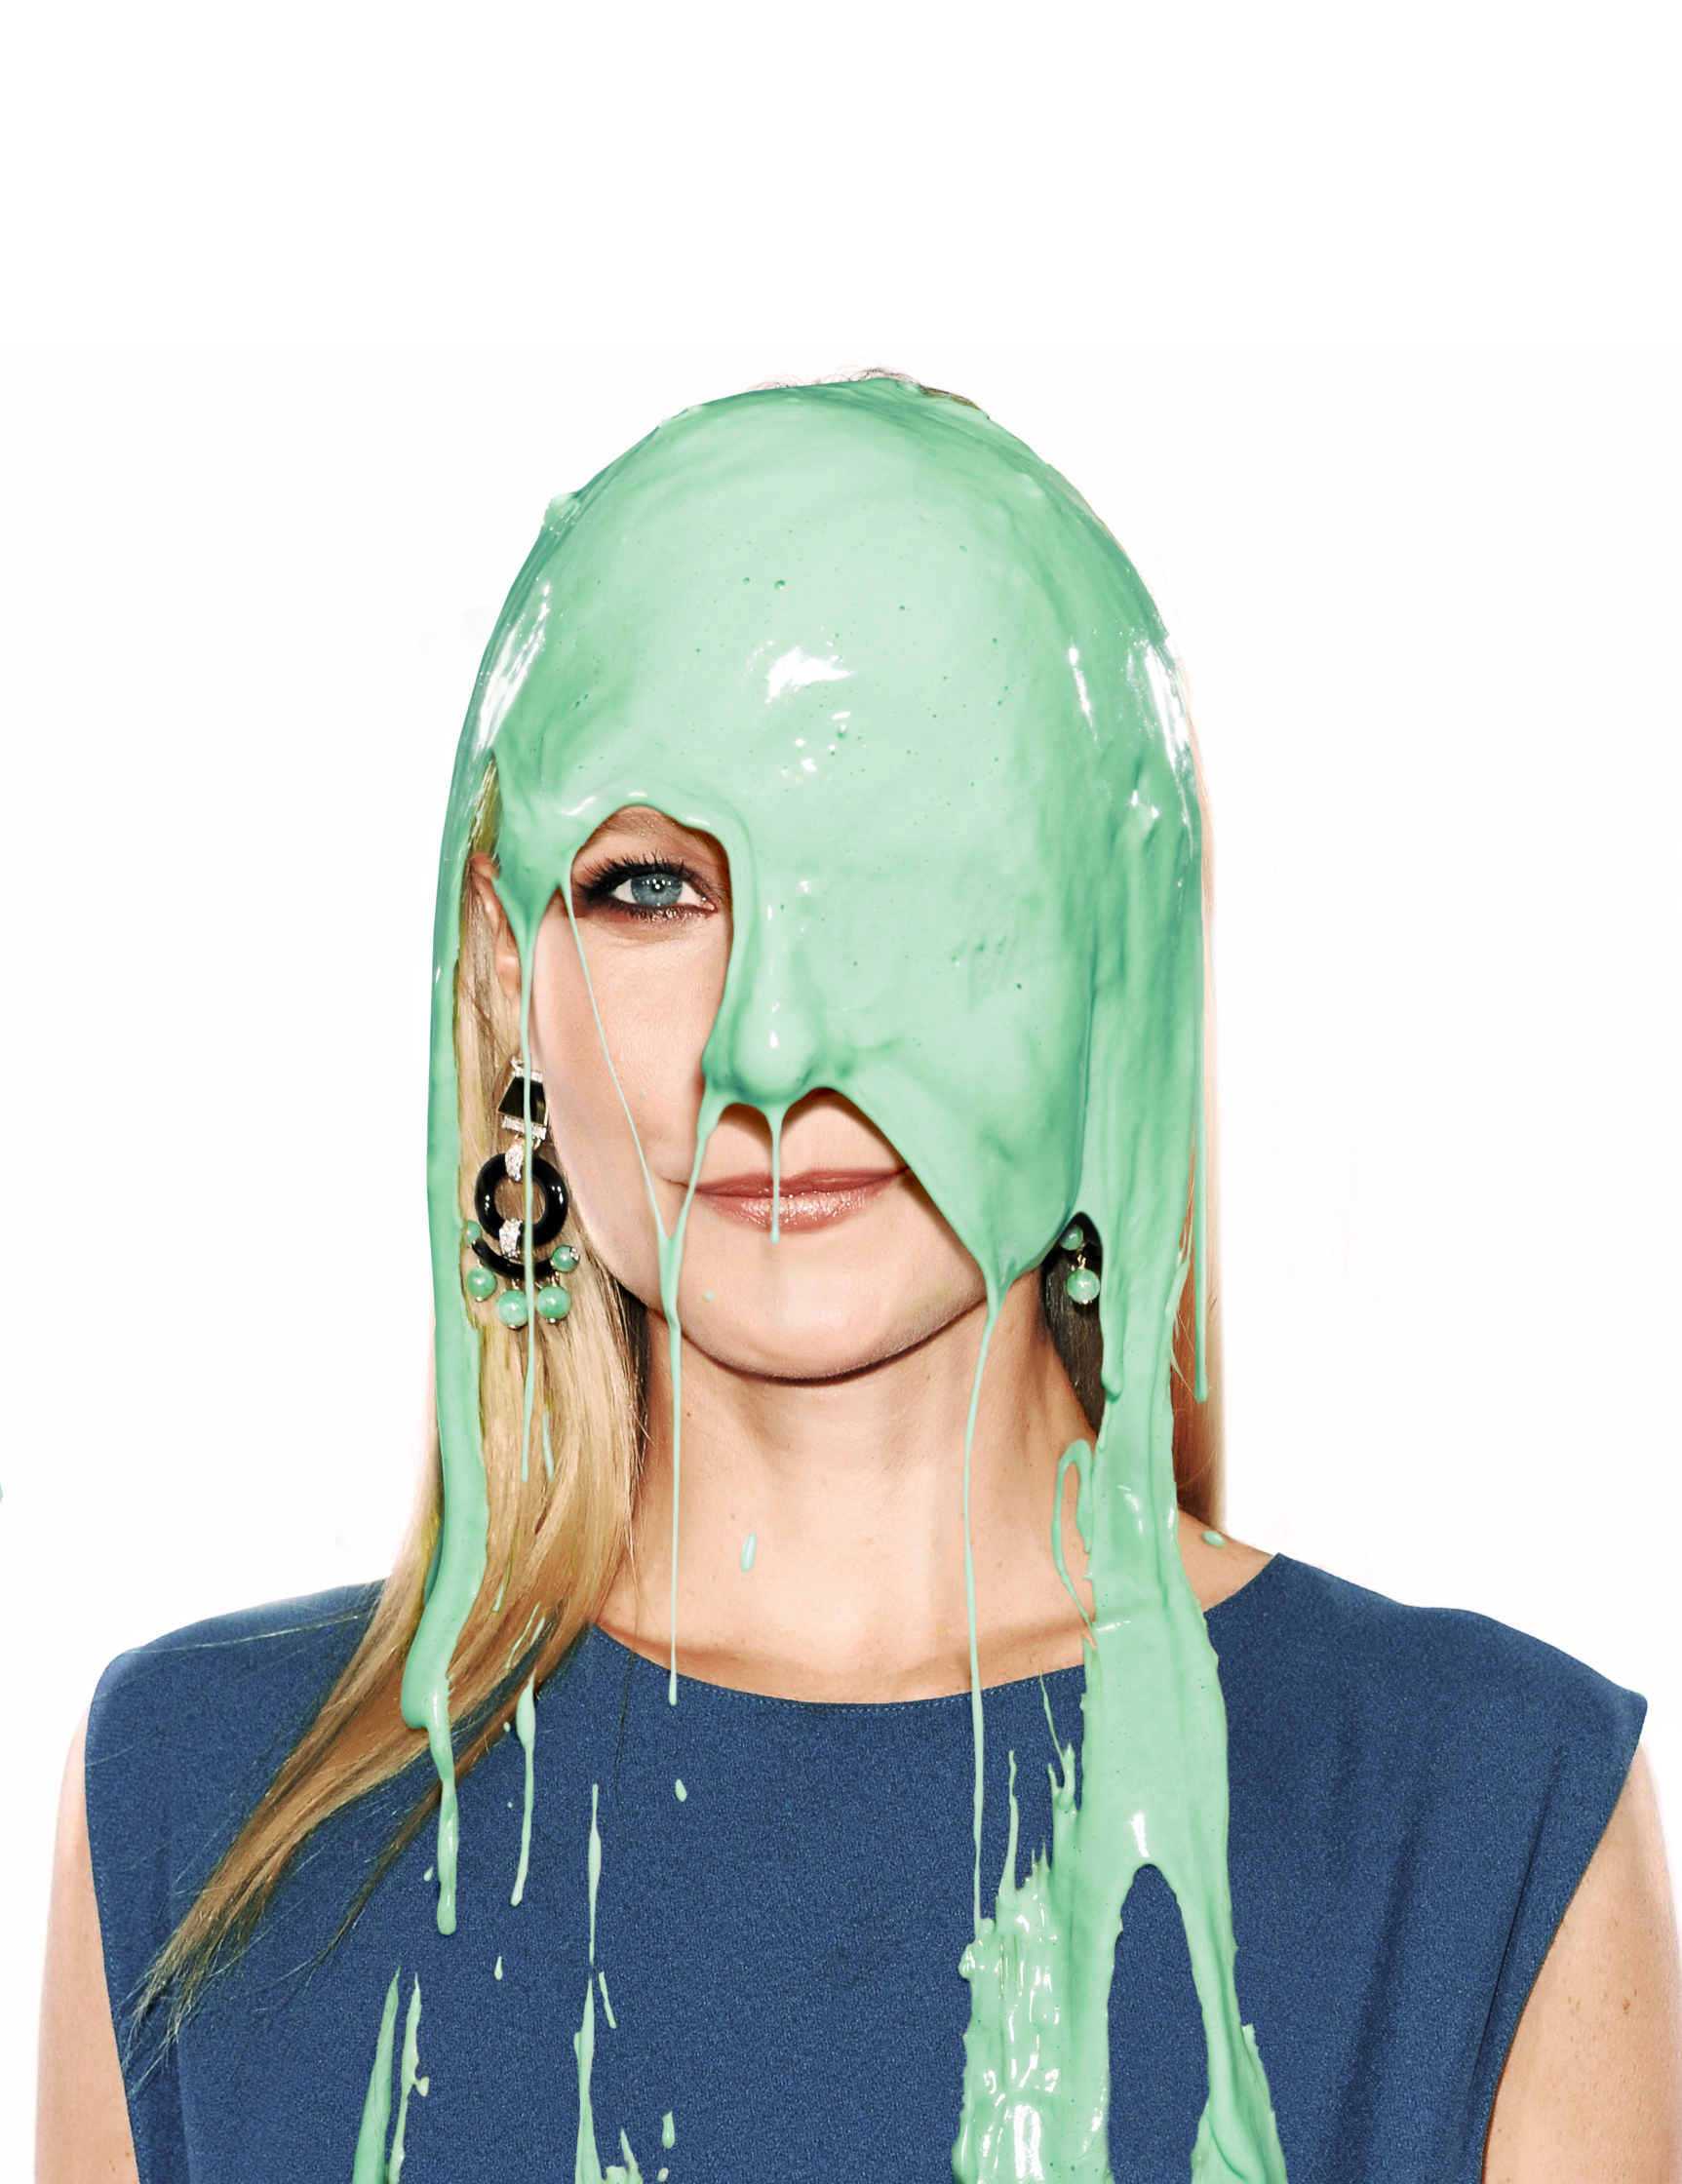 Paltrow Goop / Sunday Times